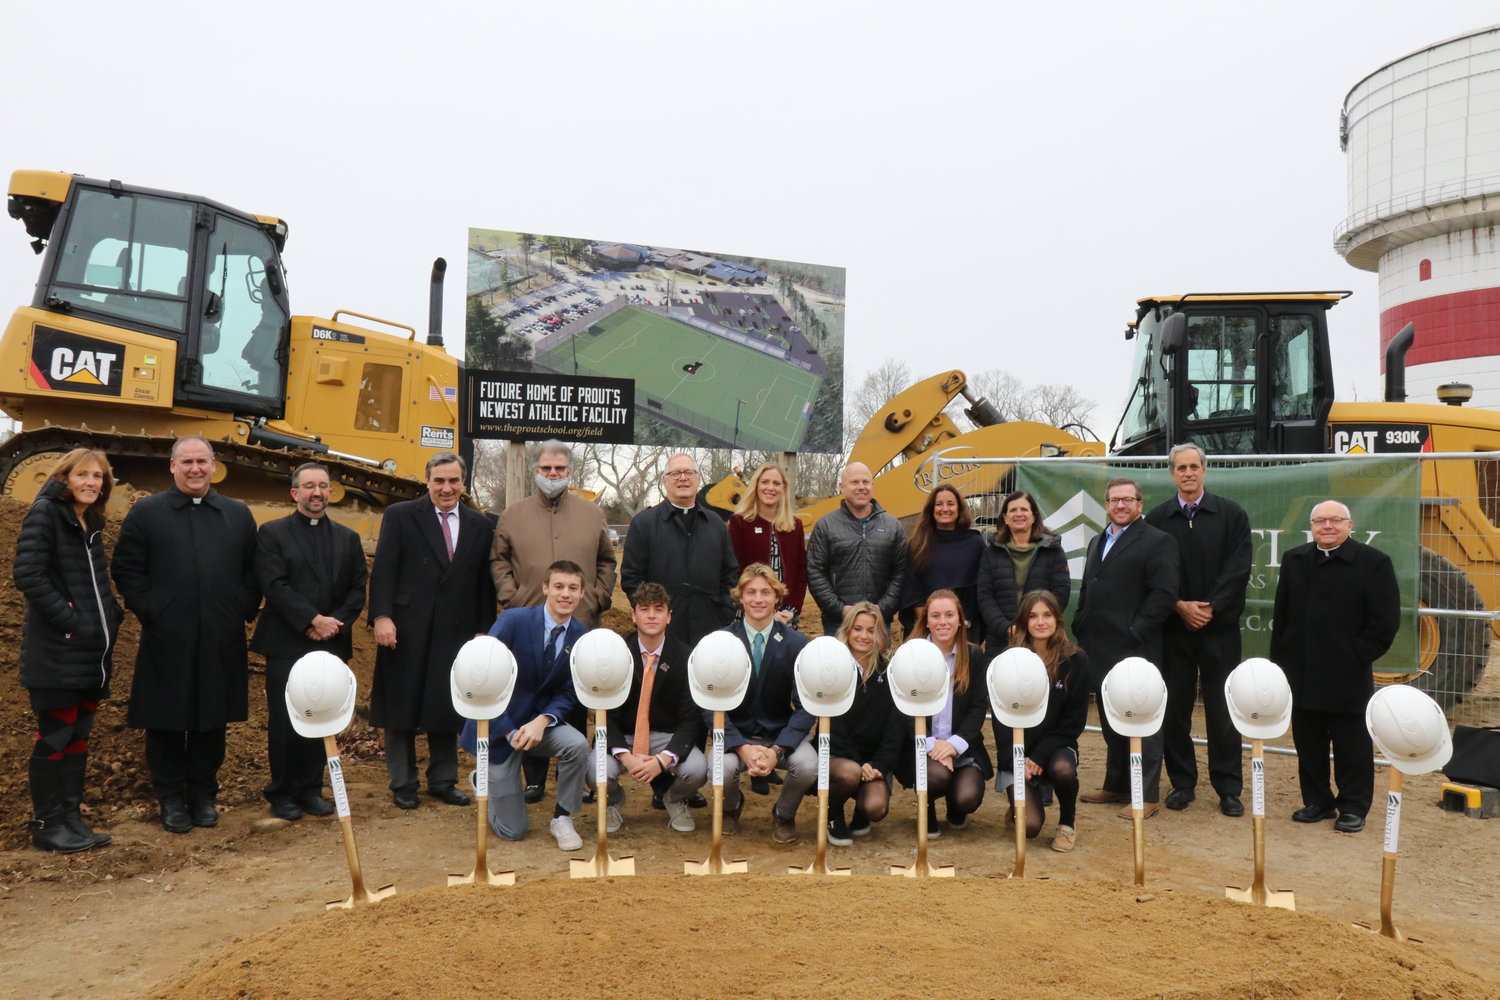 Bishop Thomas J. Tobin, sixth from left, gathers with diocesan and Prout School officials, including Principal David Estes, fourth from left, along with committee members and students who have worked hard to develop a first-rate, multi-use athletic field on the school’s Wakefield campus.